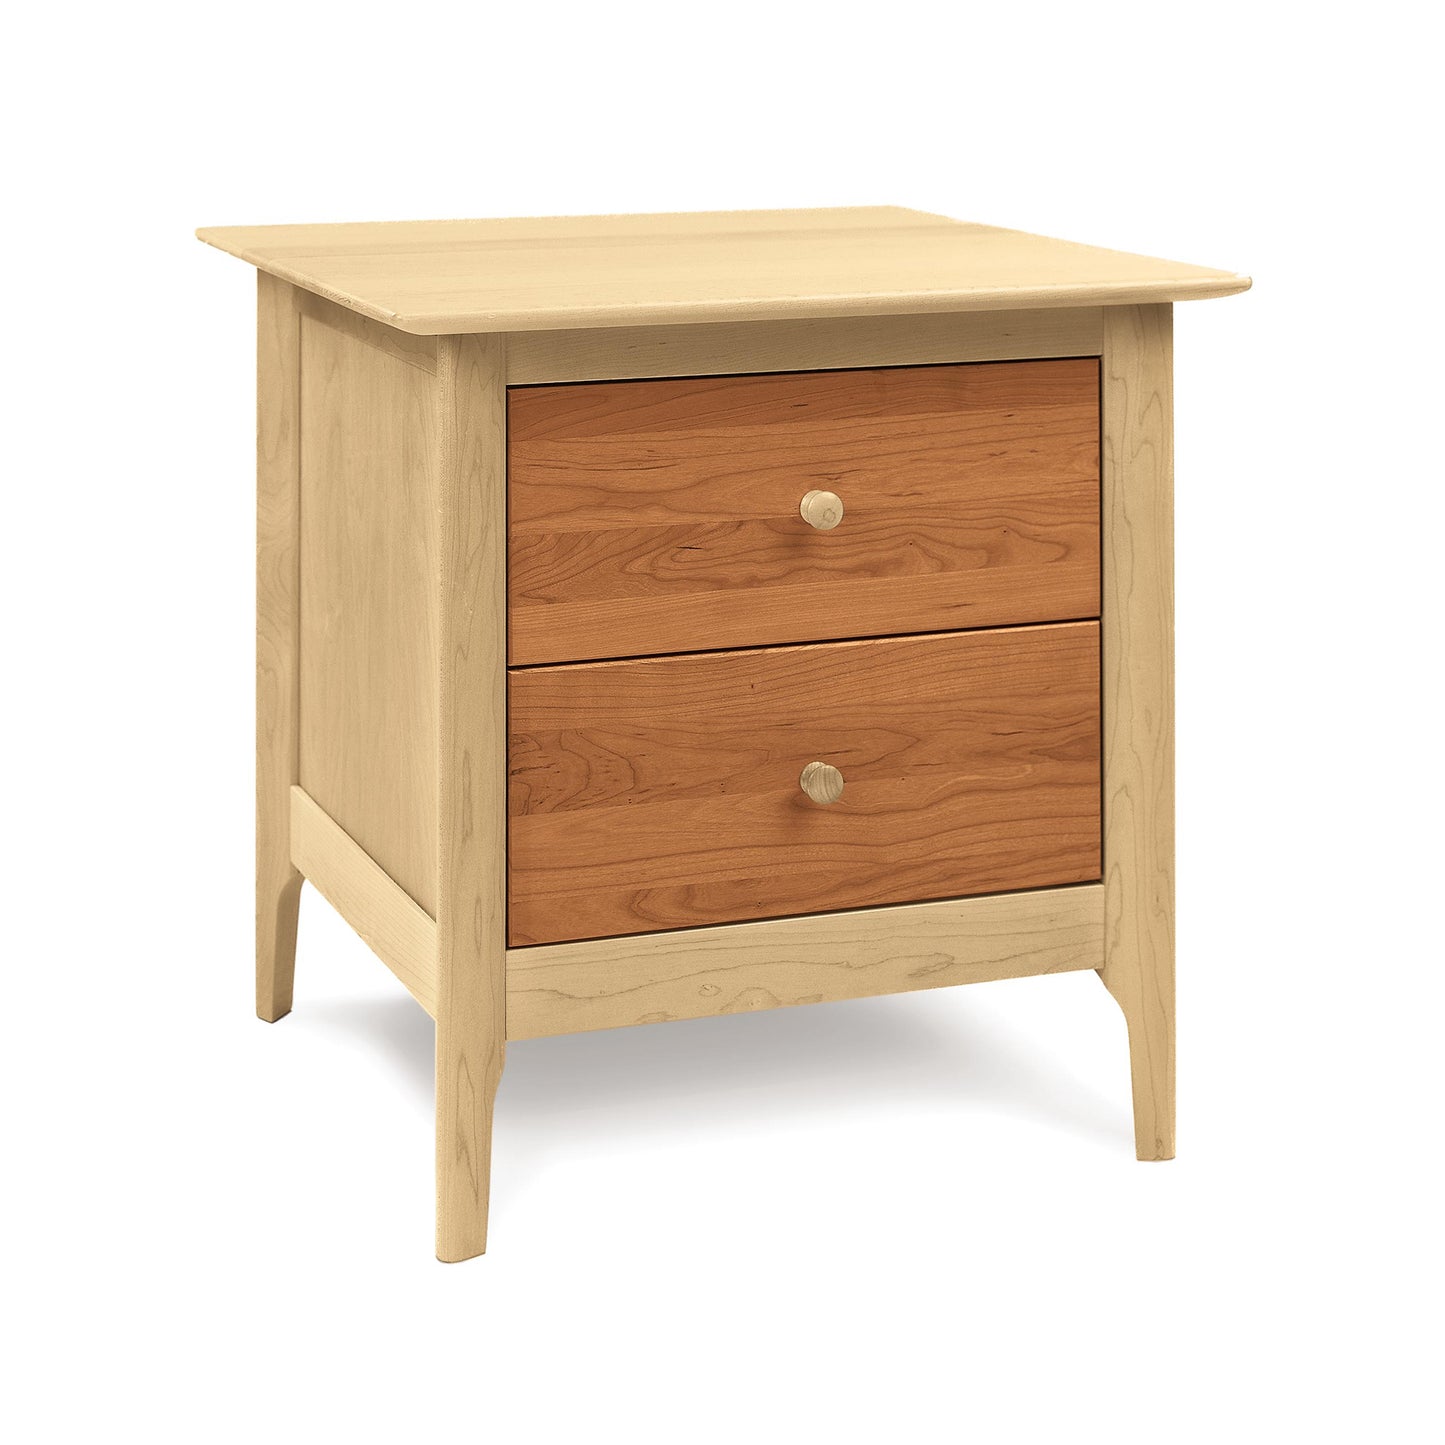 A Sarah 2-Drawer Nightstand by Copeland Furniture with round knobs, crafted from sustainable harvested wood, against a white background.